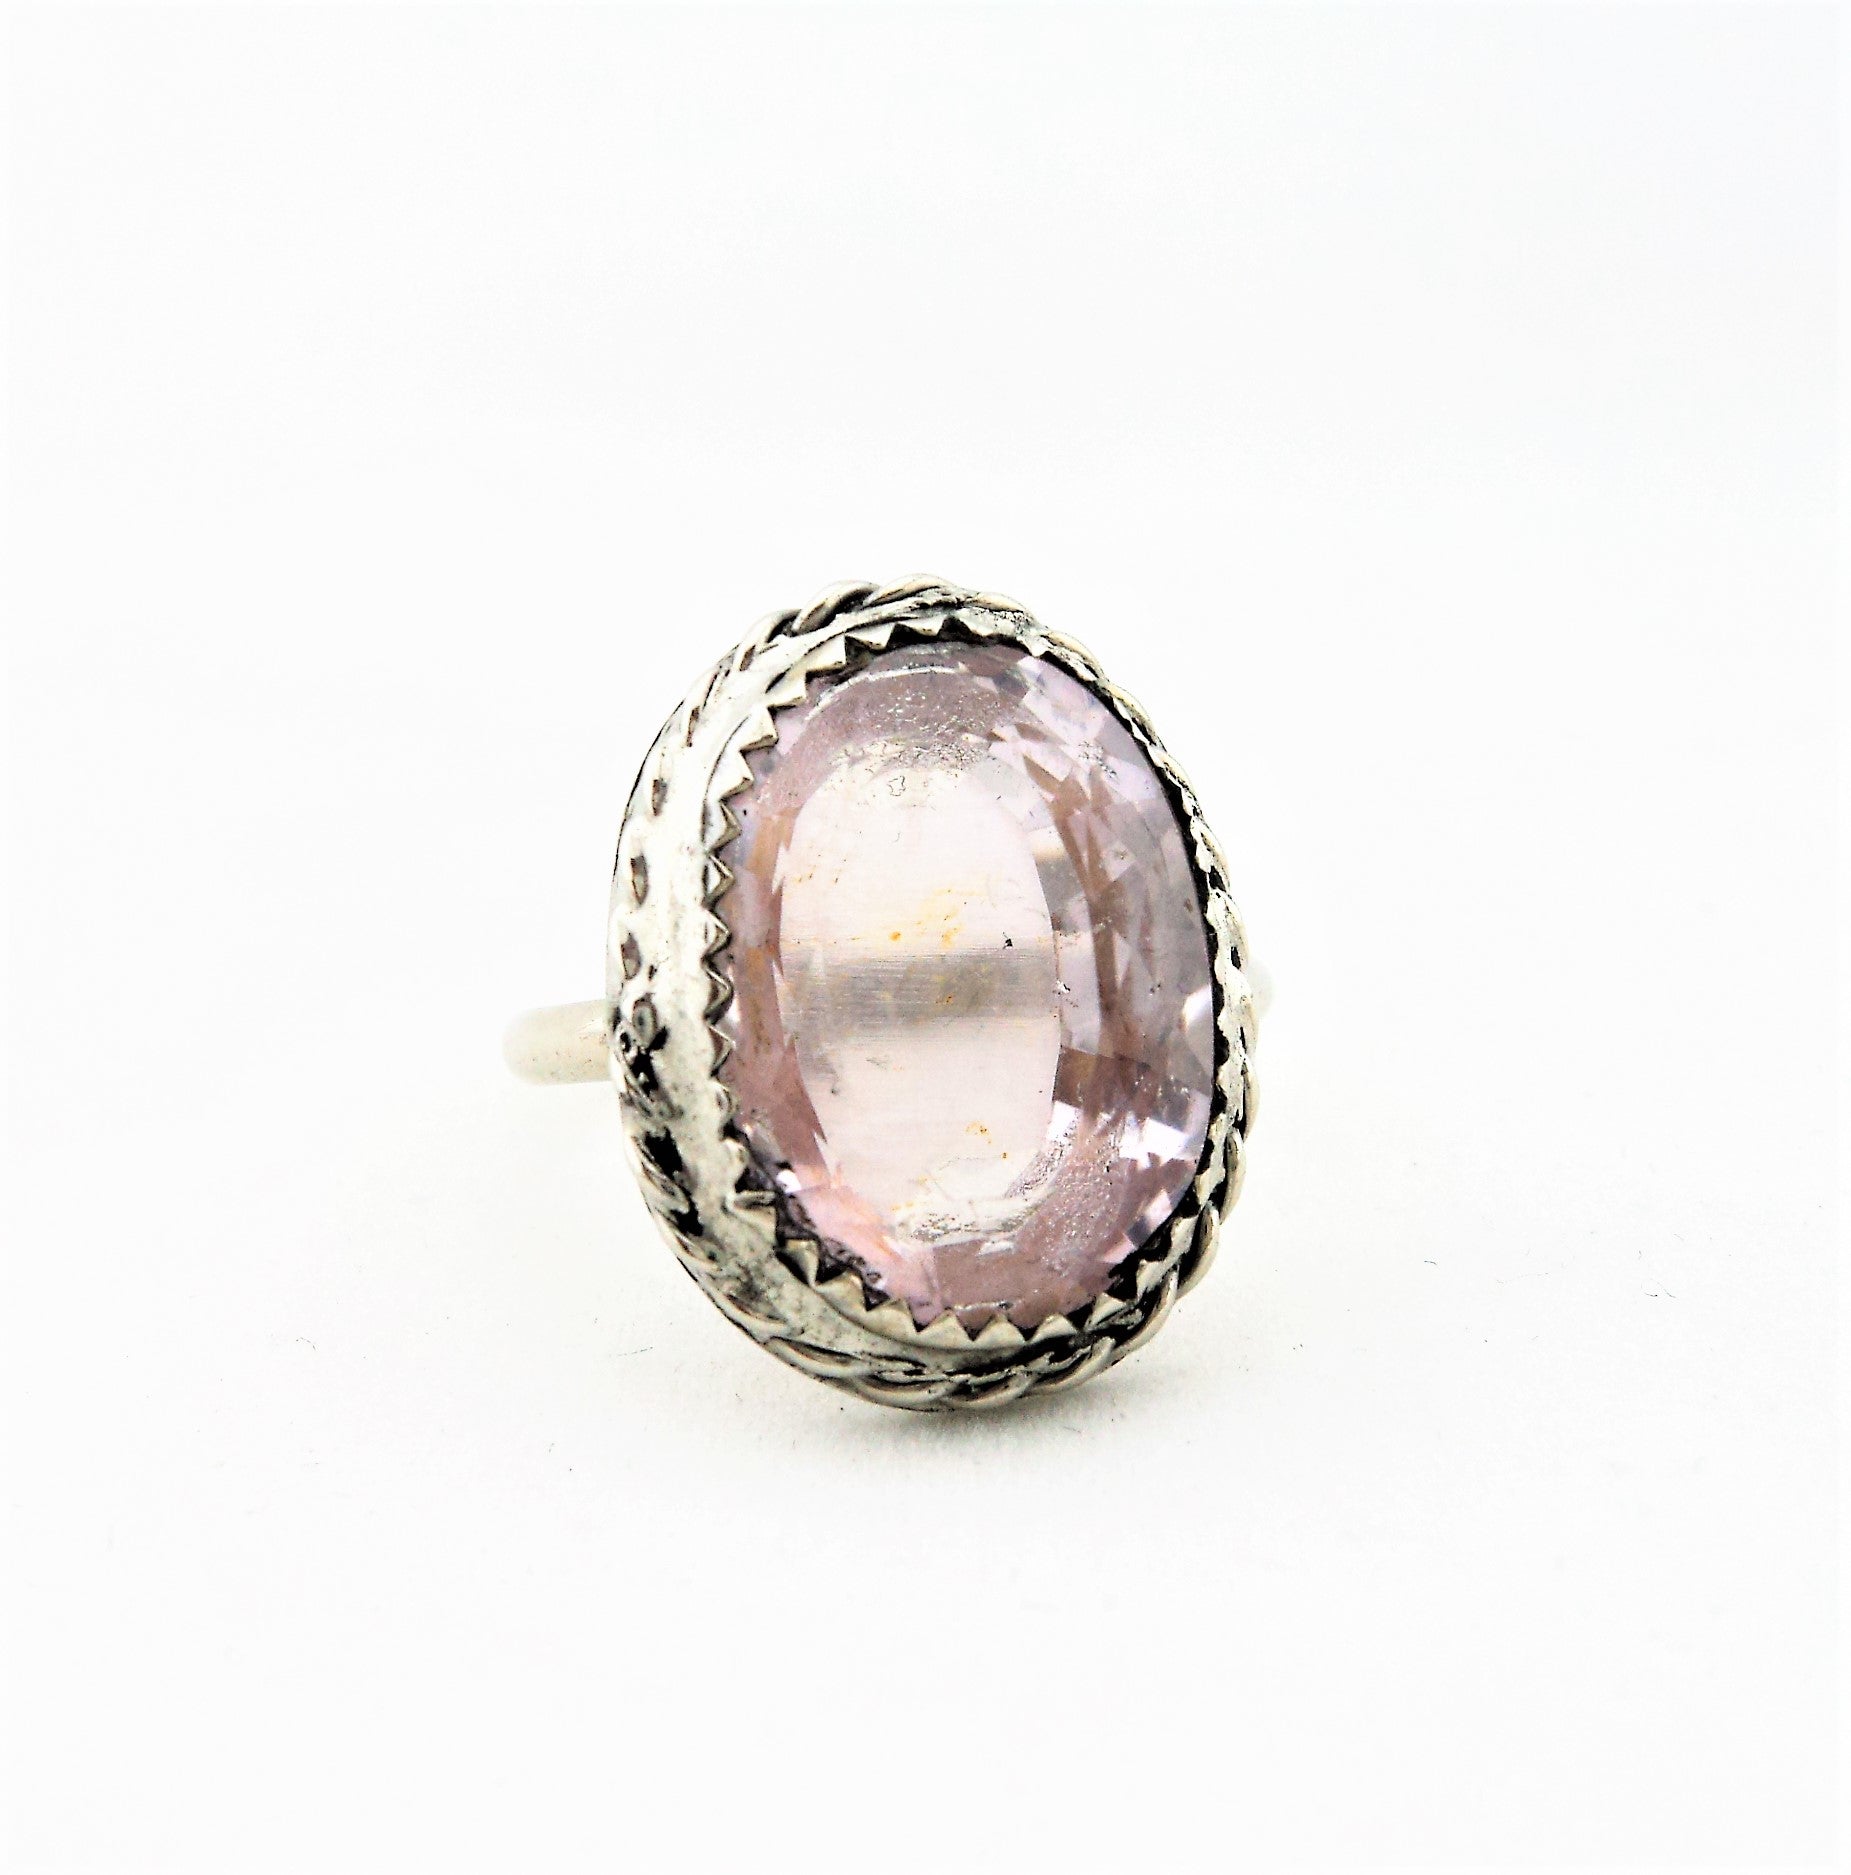 Silver and Pale Pink Quartz Ring